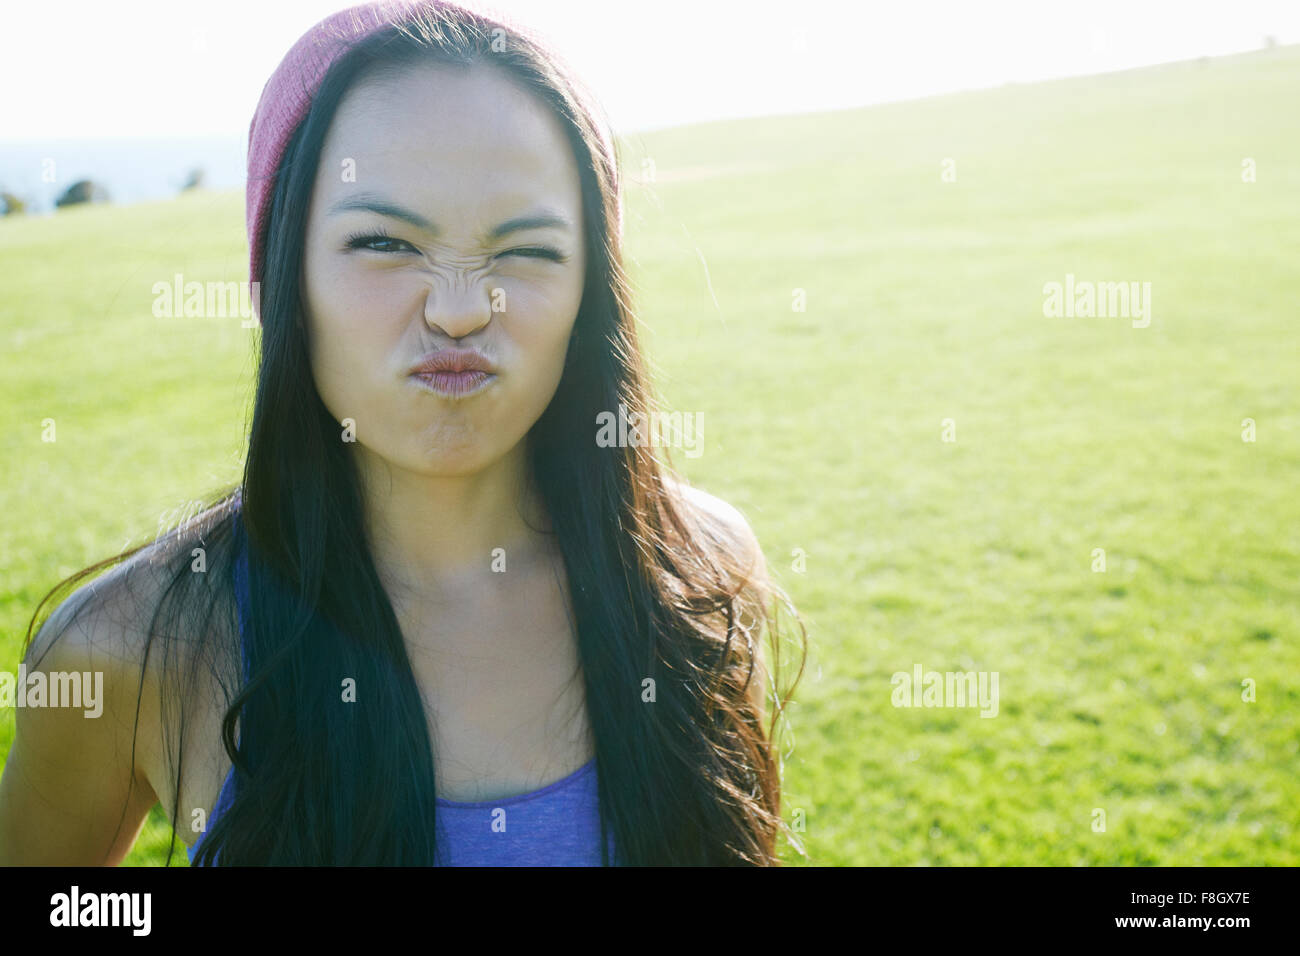 Asian woman making a face outdoors Stock Photo